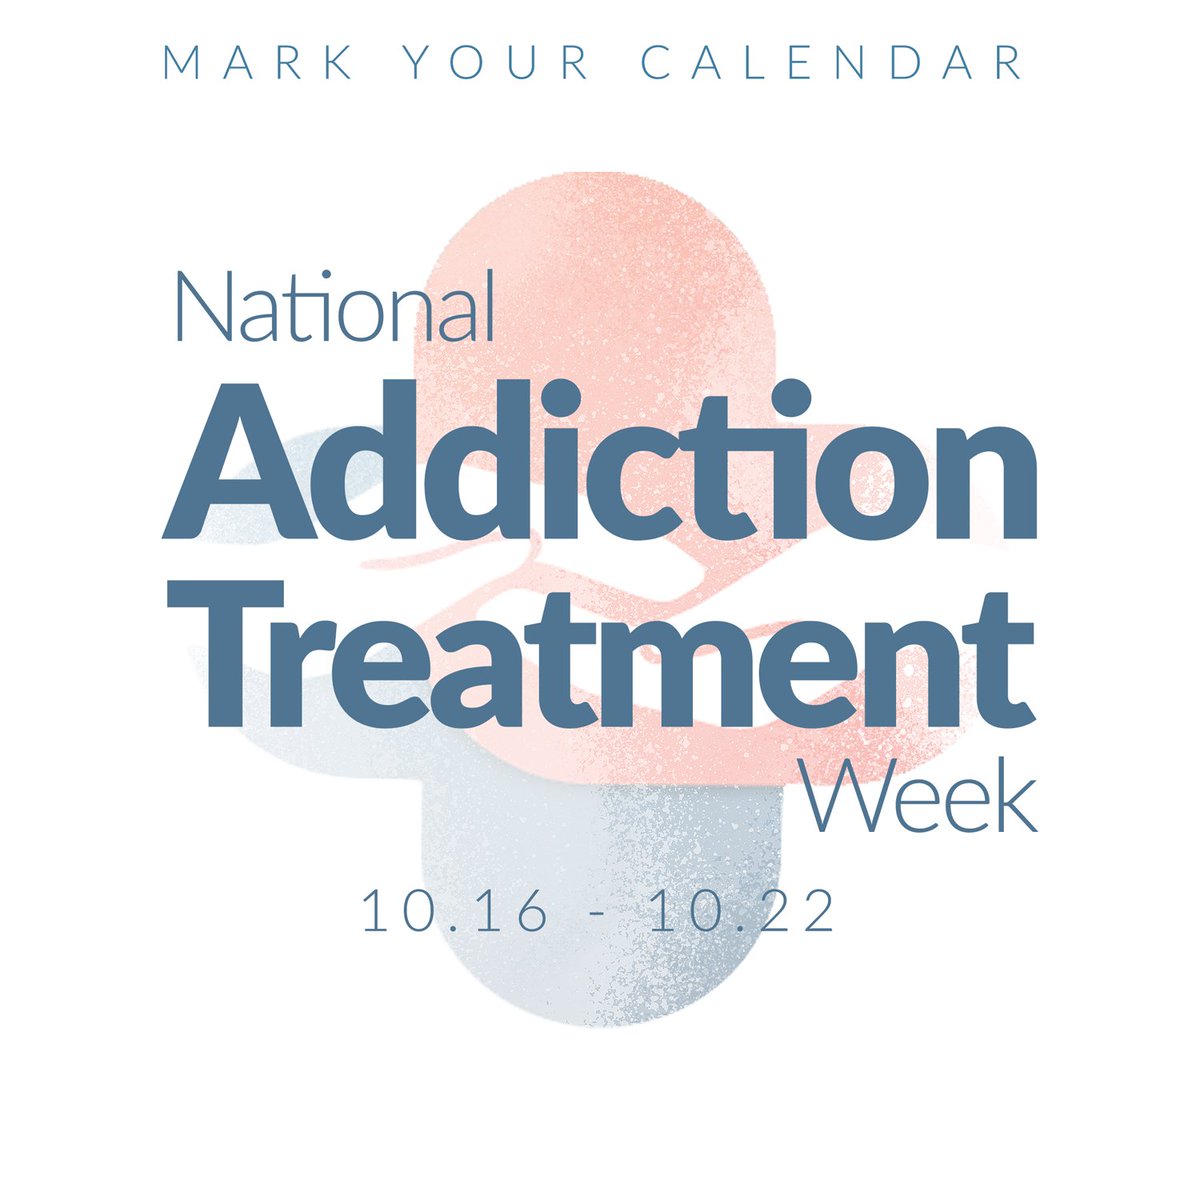 Tobacco dependence is an addiction; smoking cessation provided during addictions treatment were associated w/ a 25% increase in long-term abstinence from alcohol & illicit drugs. Help reduce the stigma surrounding addiction & promote understanding & empathy during #TreatmentWeek.